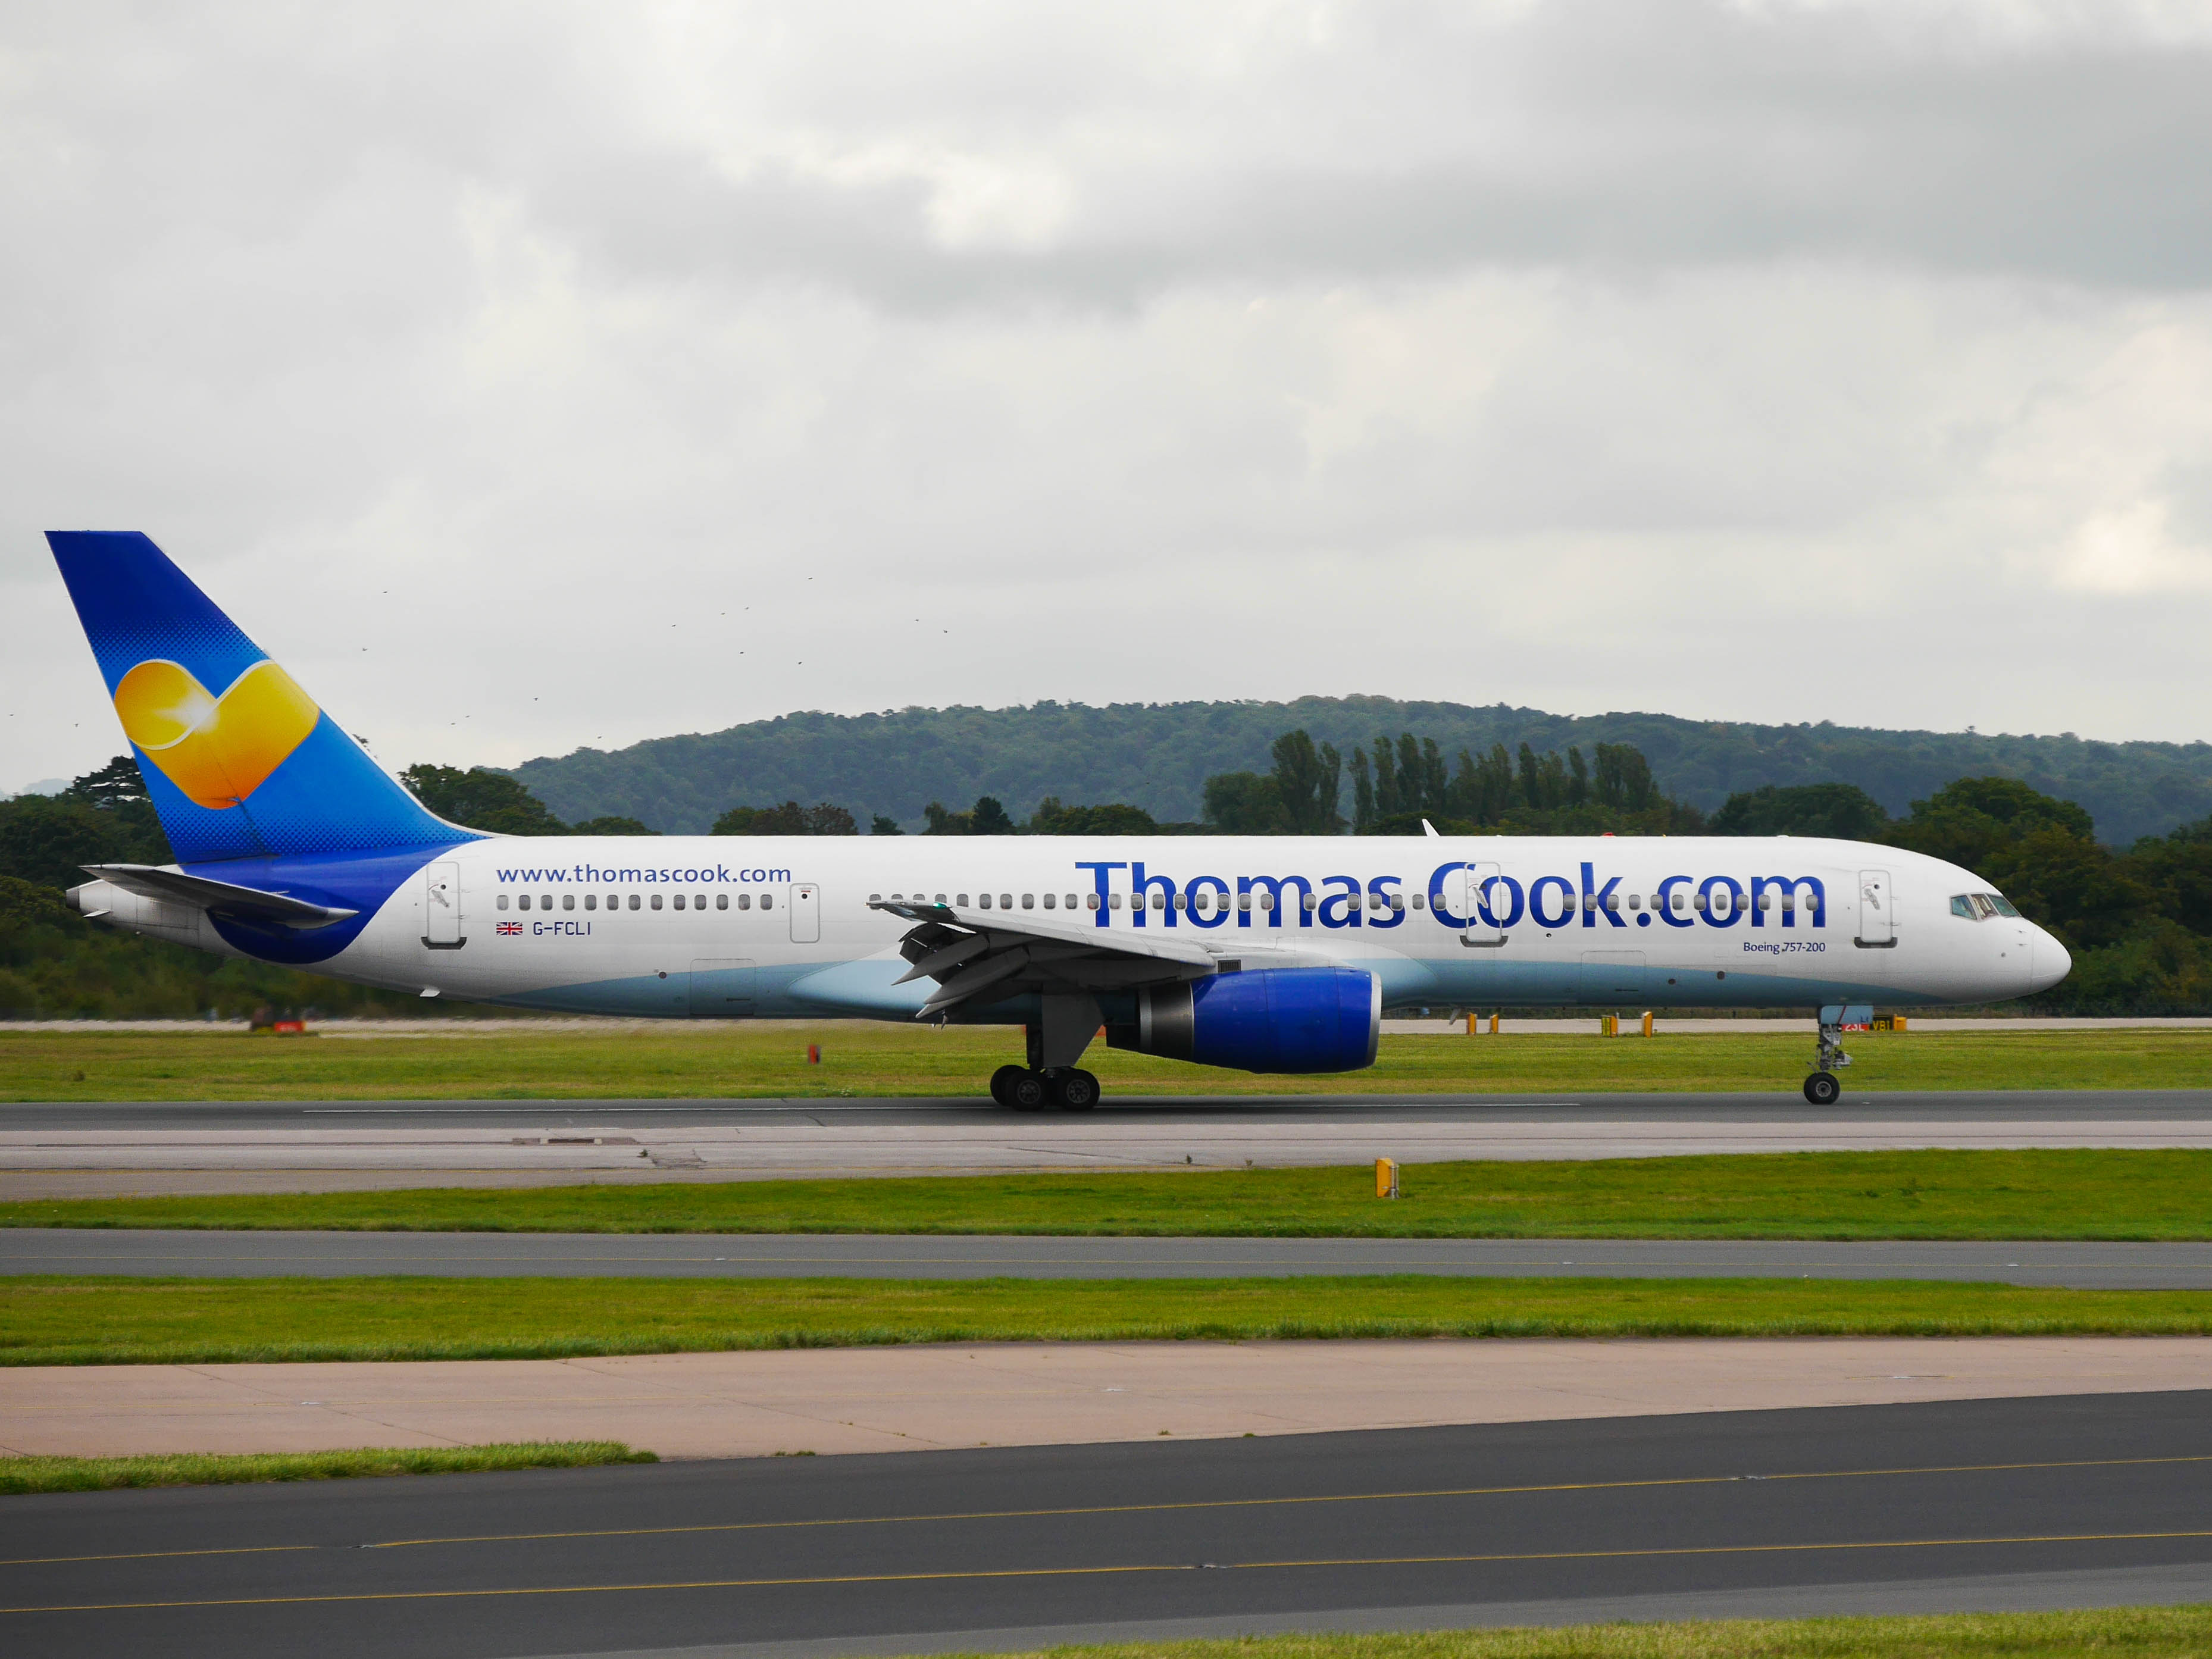 G-FCLI/GFCLI Thomas Cook Airlines Boeing 757-28A Photo by colinw - AVSpotters.com